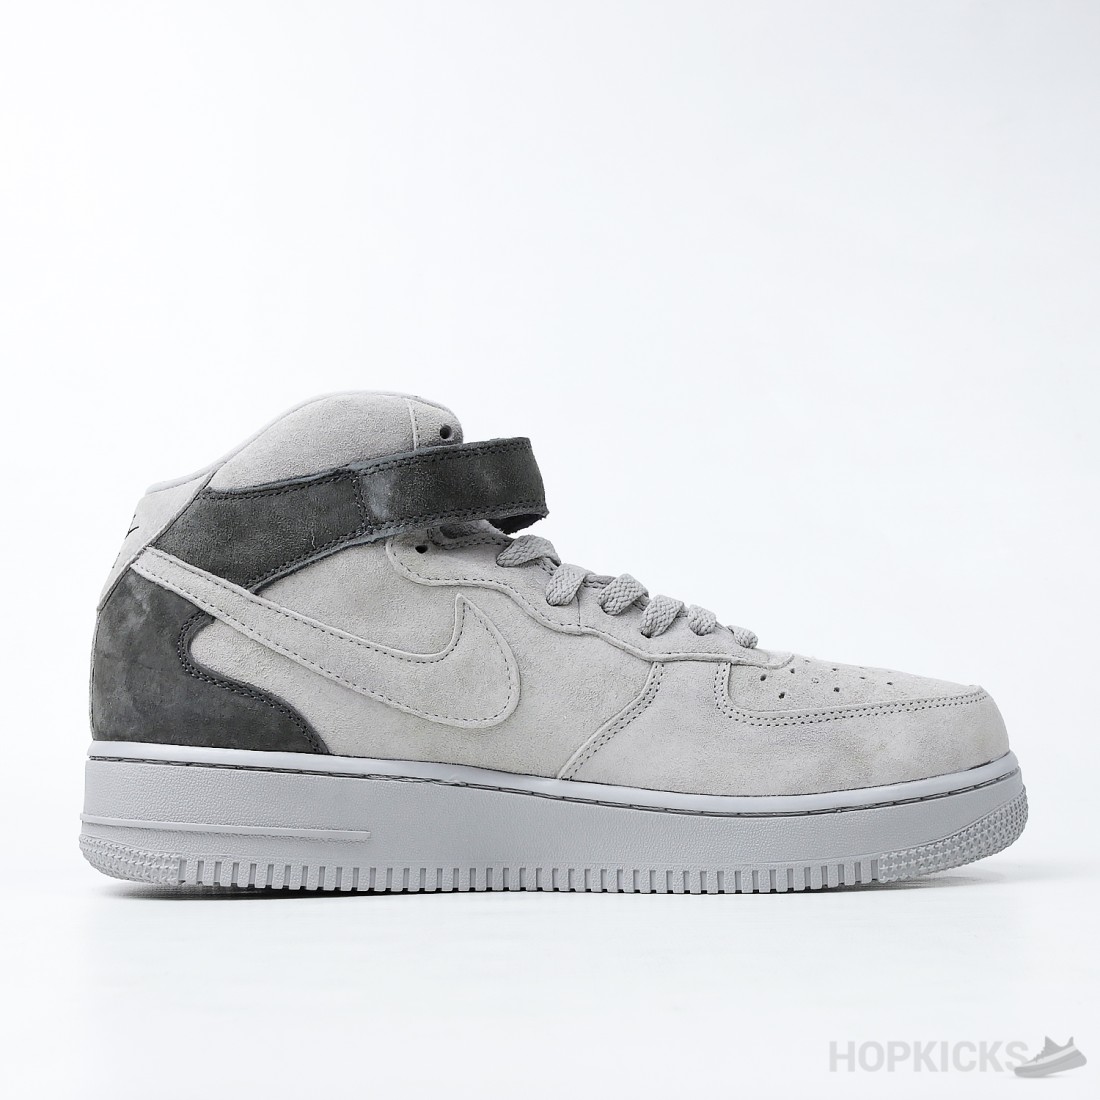 Reigning Champ X Air Force 1 Mid Grey Black